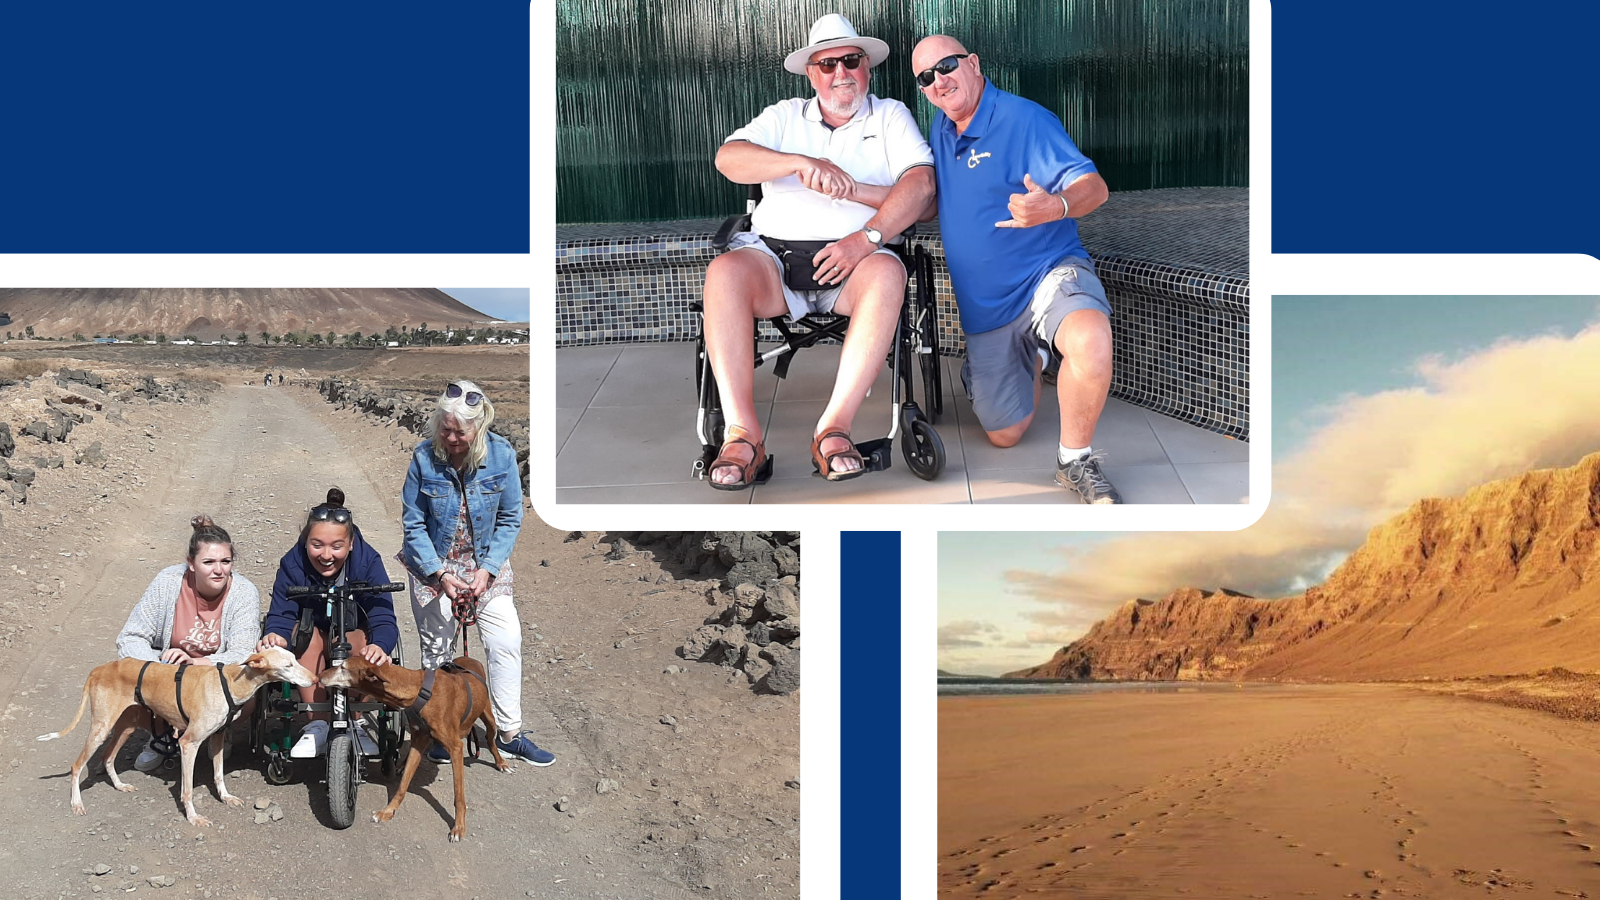 Three pictures from LanzAbility. The top centre image is of the owner David with a customer who is a wheelchair user. The bottom left image is of three women who are on an excursion, one is using an adapted scooter. The bottom right image is of the Lanzarote scenery and mountains. 